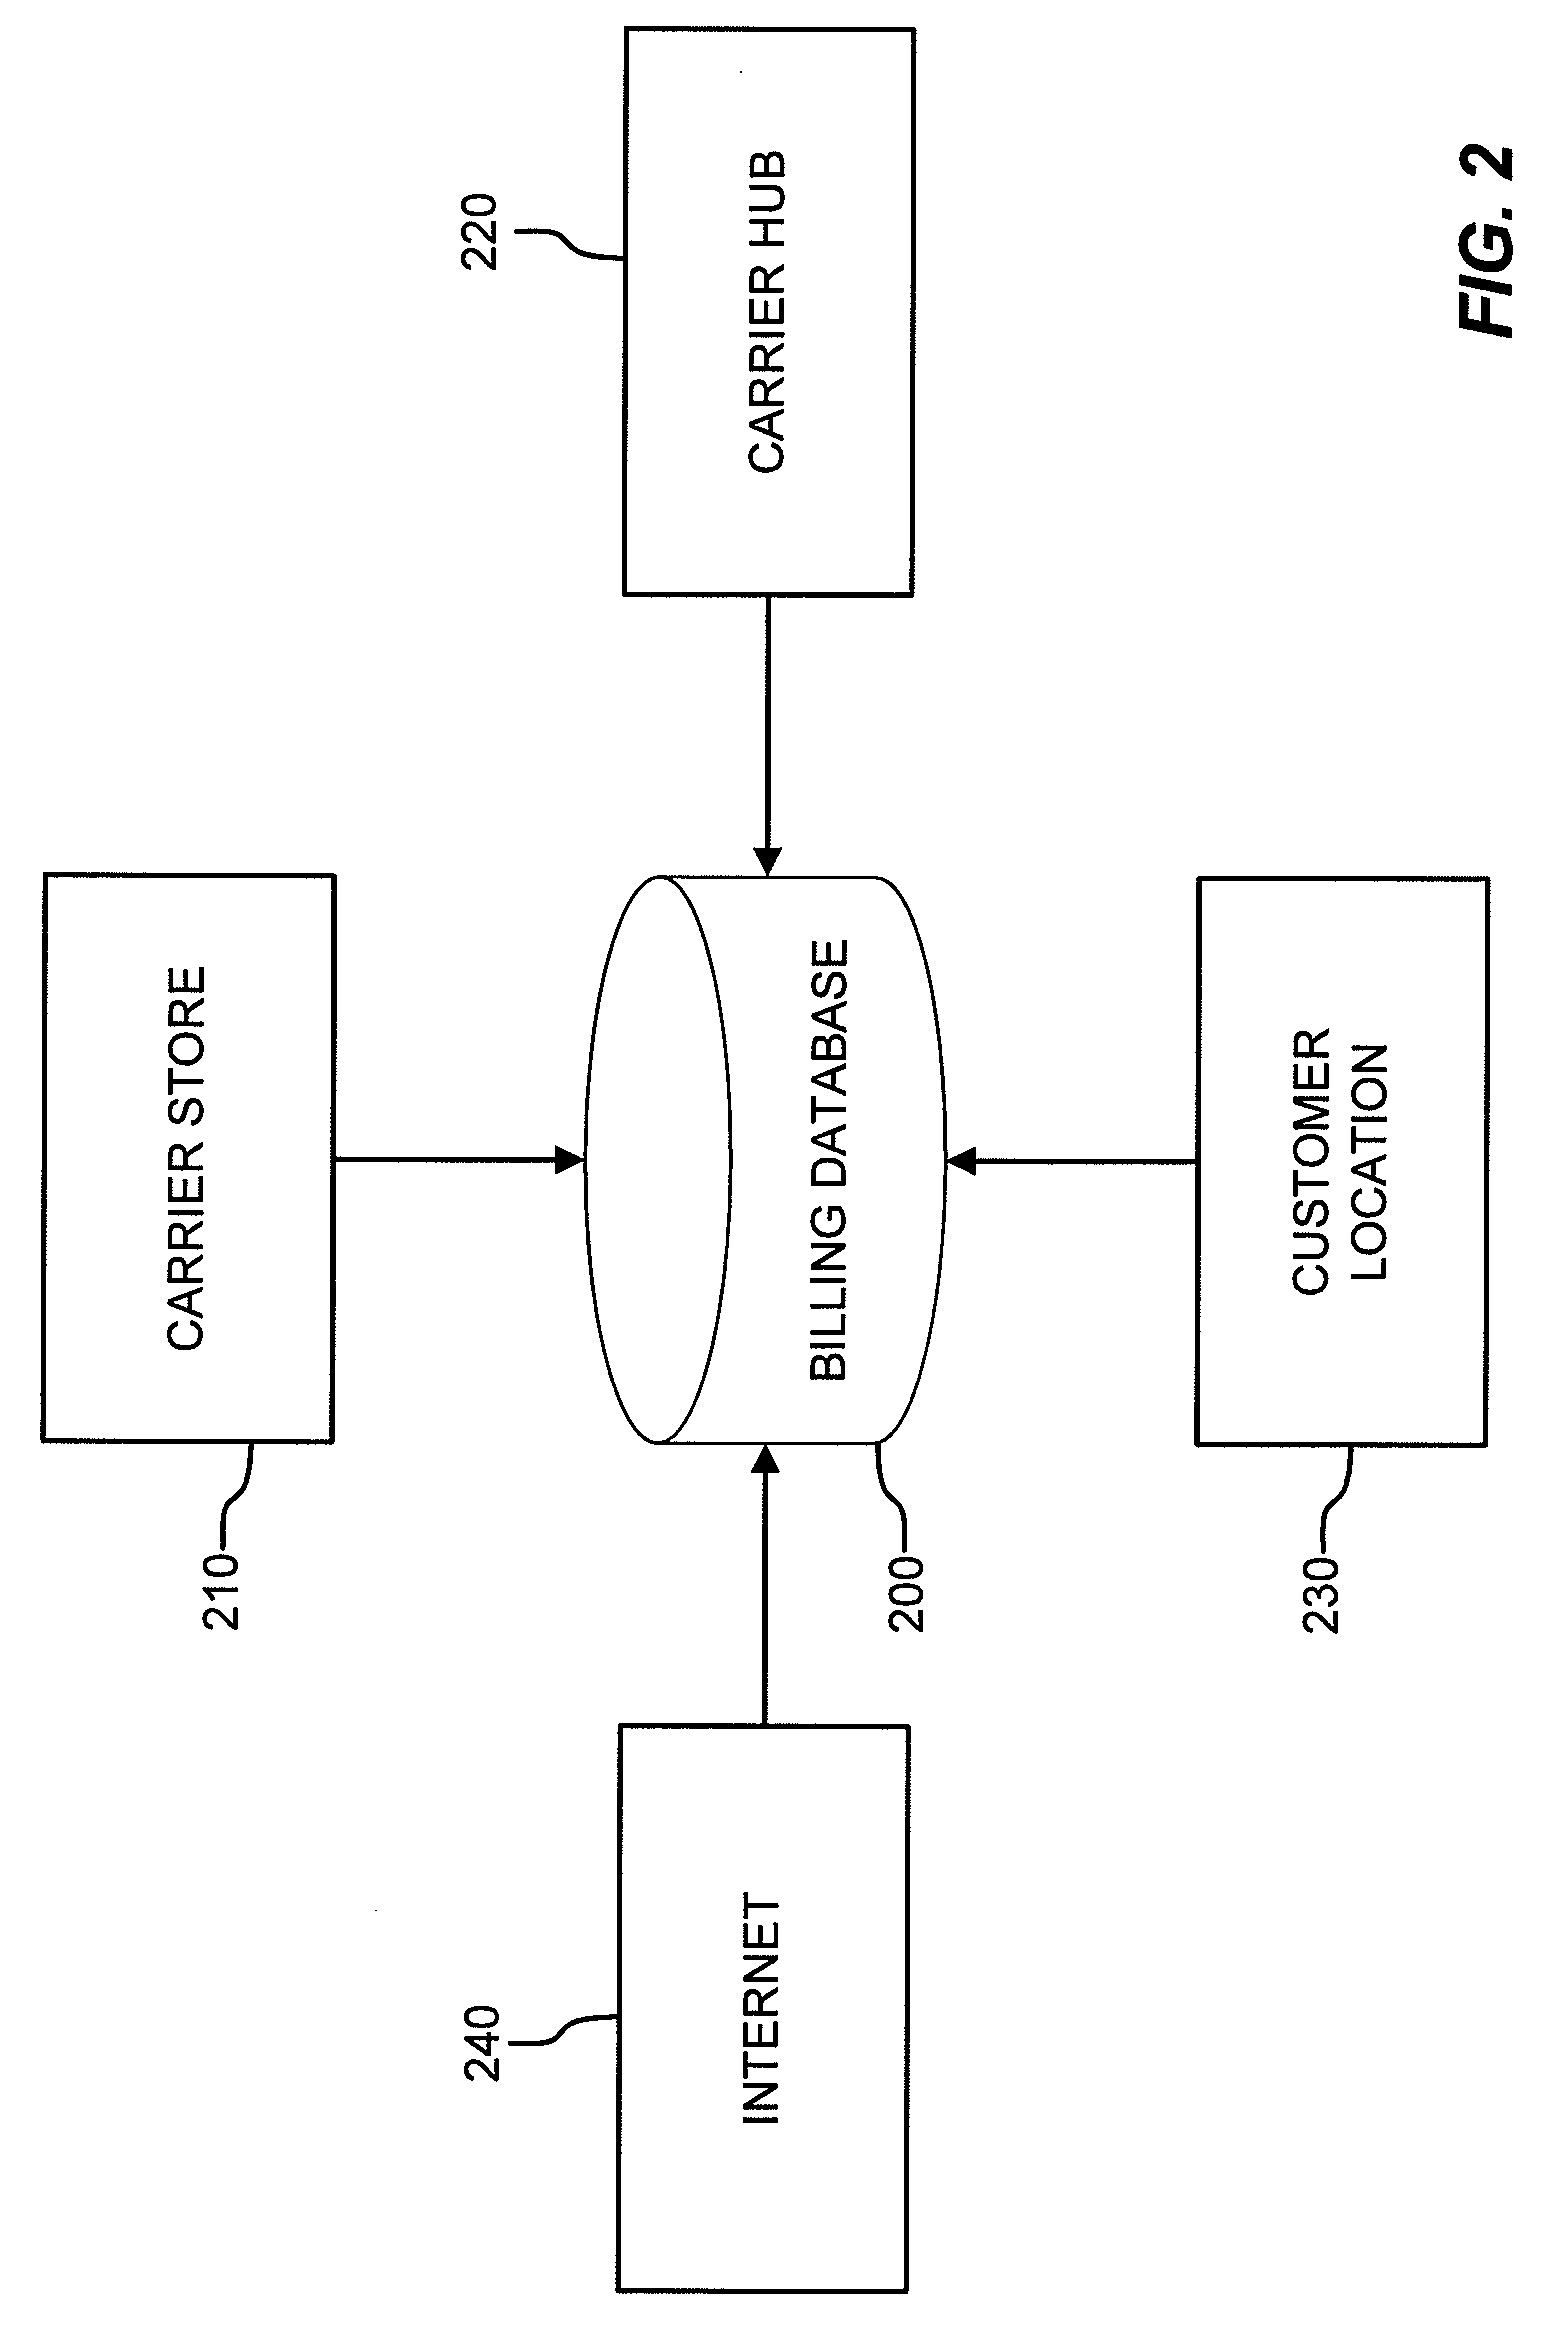 Trailer utilization systems, methods, computer programs embodied on computer-readable media, and apparatuses